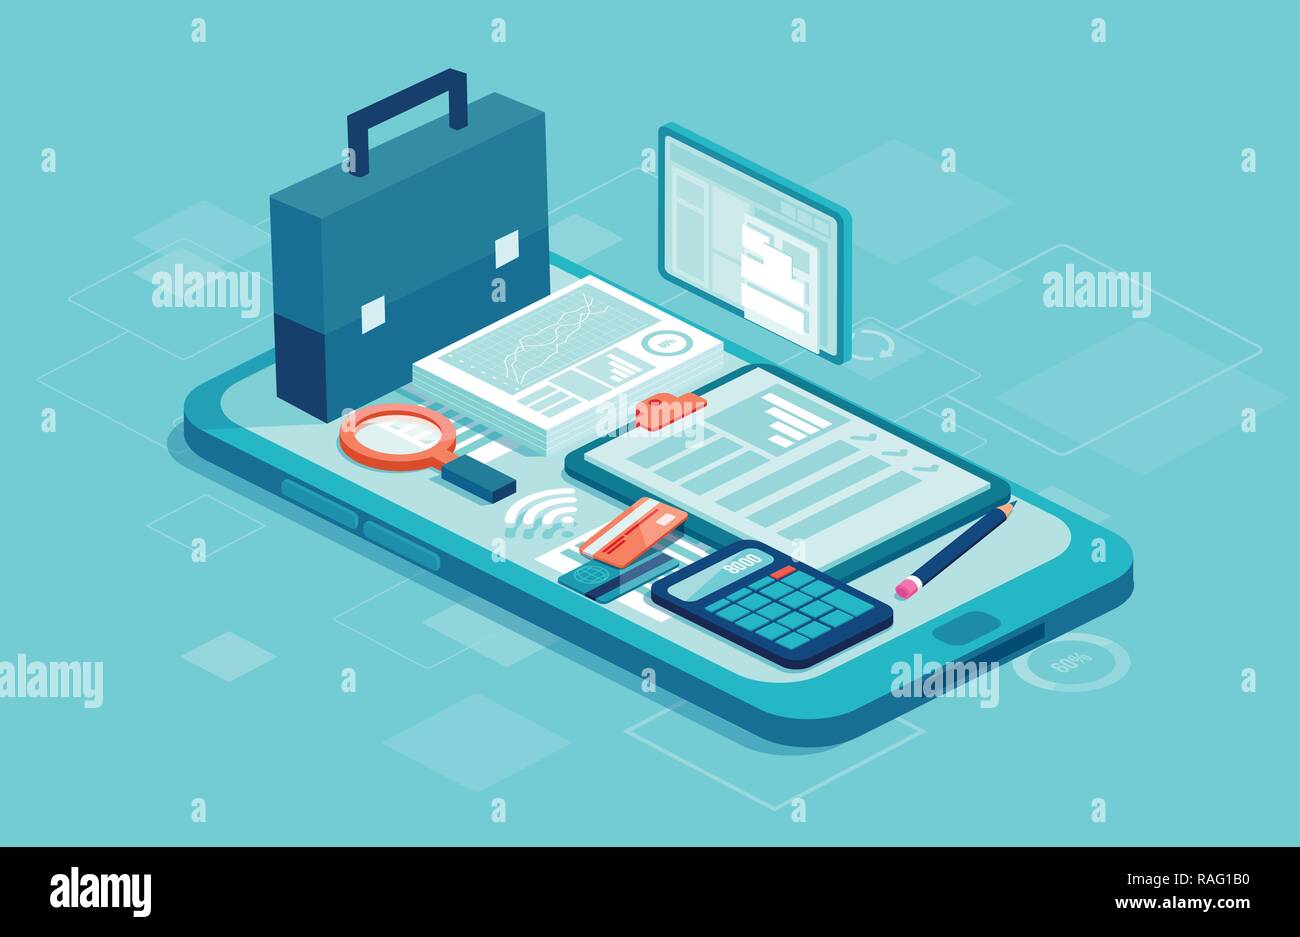 Finance management app for enterprises concept. Vector of a business equipment and icons on a smartphone Stock Vector